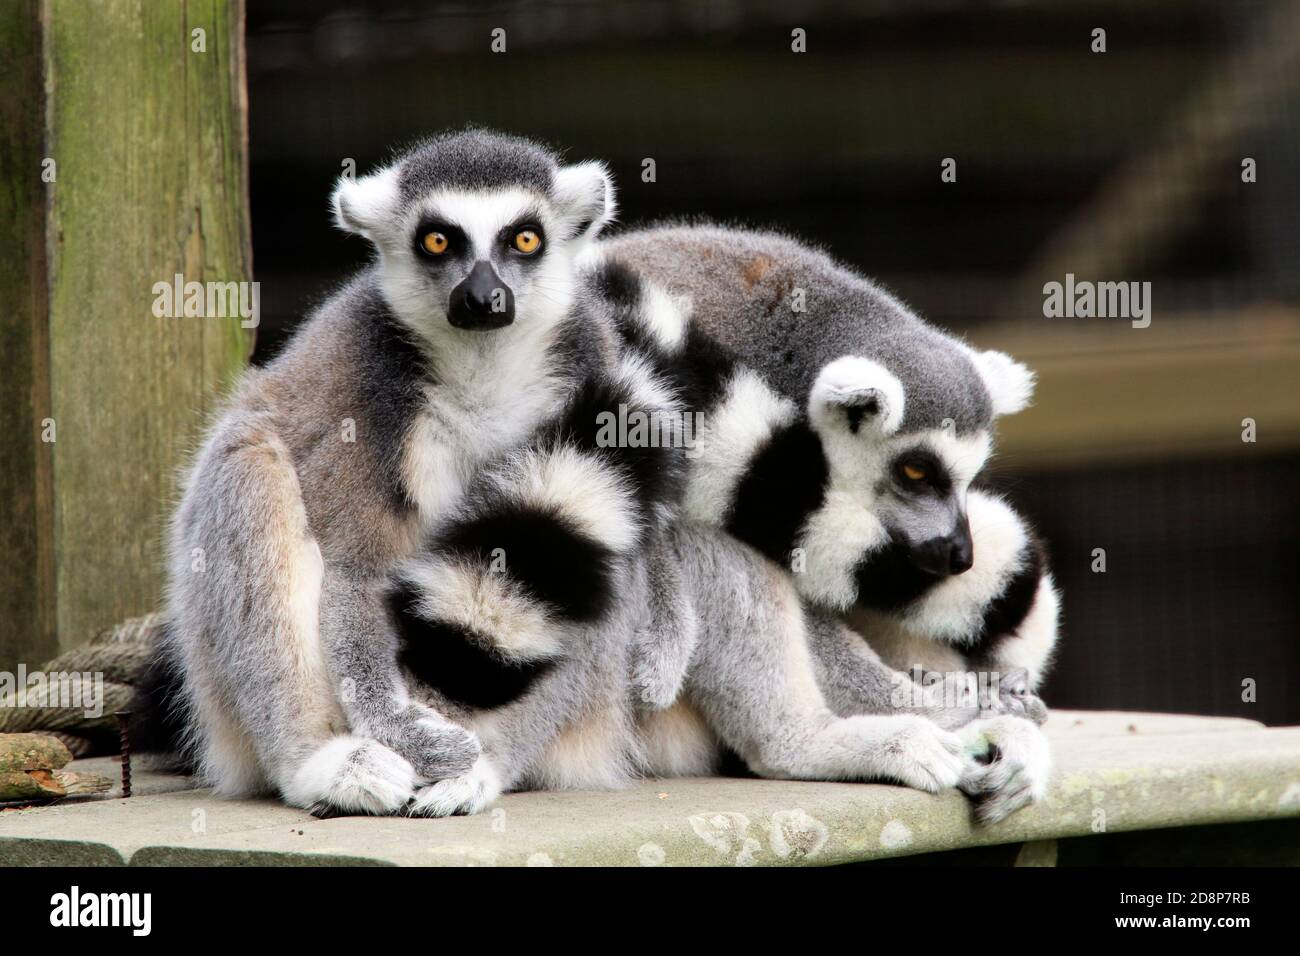 Two Ring-tailed lemurs, Lemur catta, at the Cape May County Zoo, New Jersey, USA Stock Photo